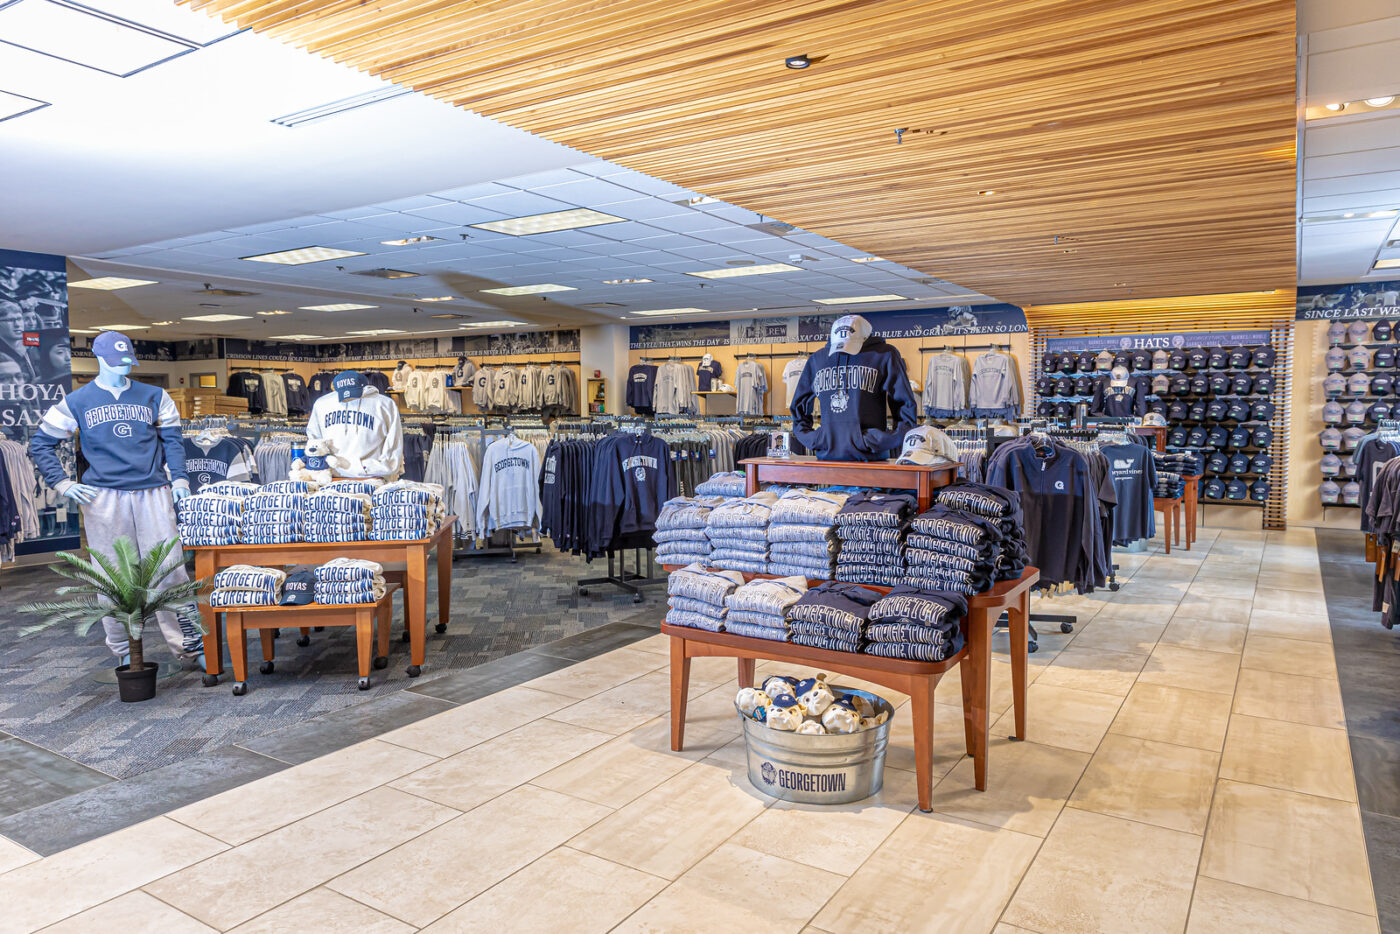 Store retail section featuring apparel